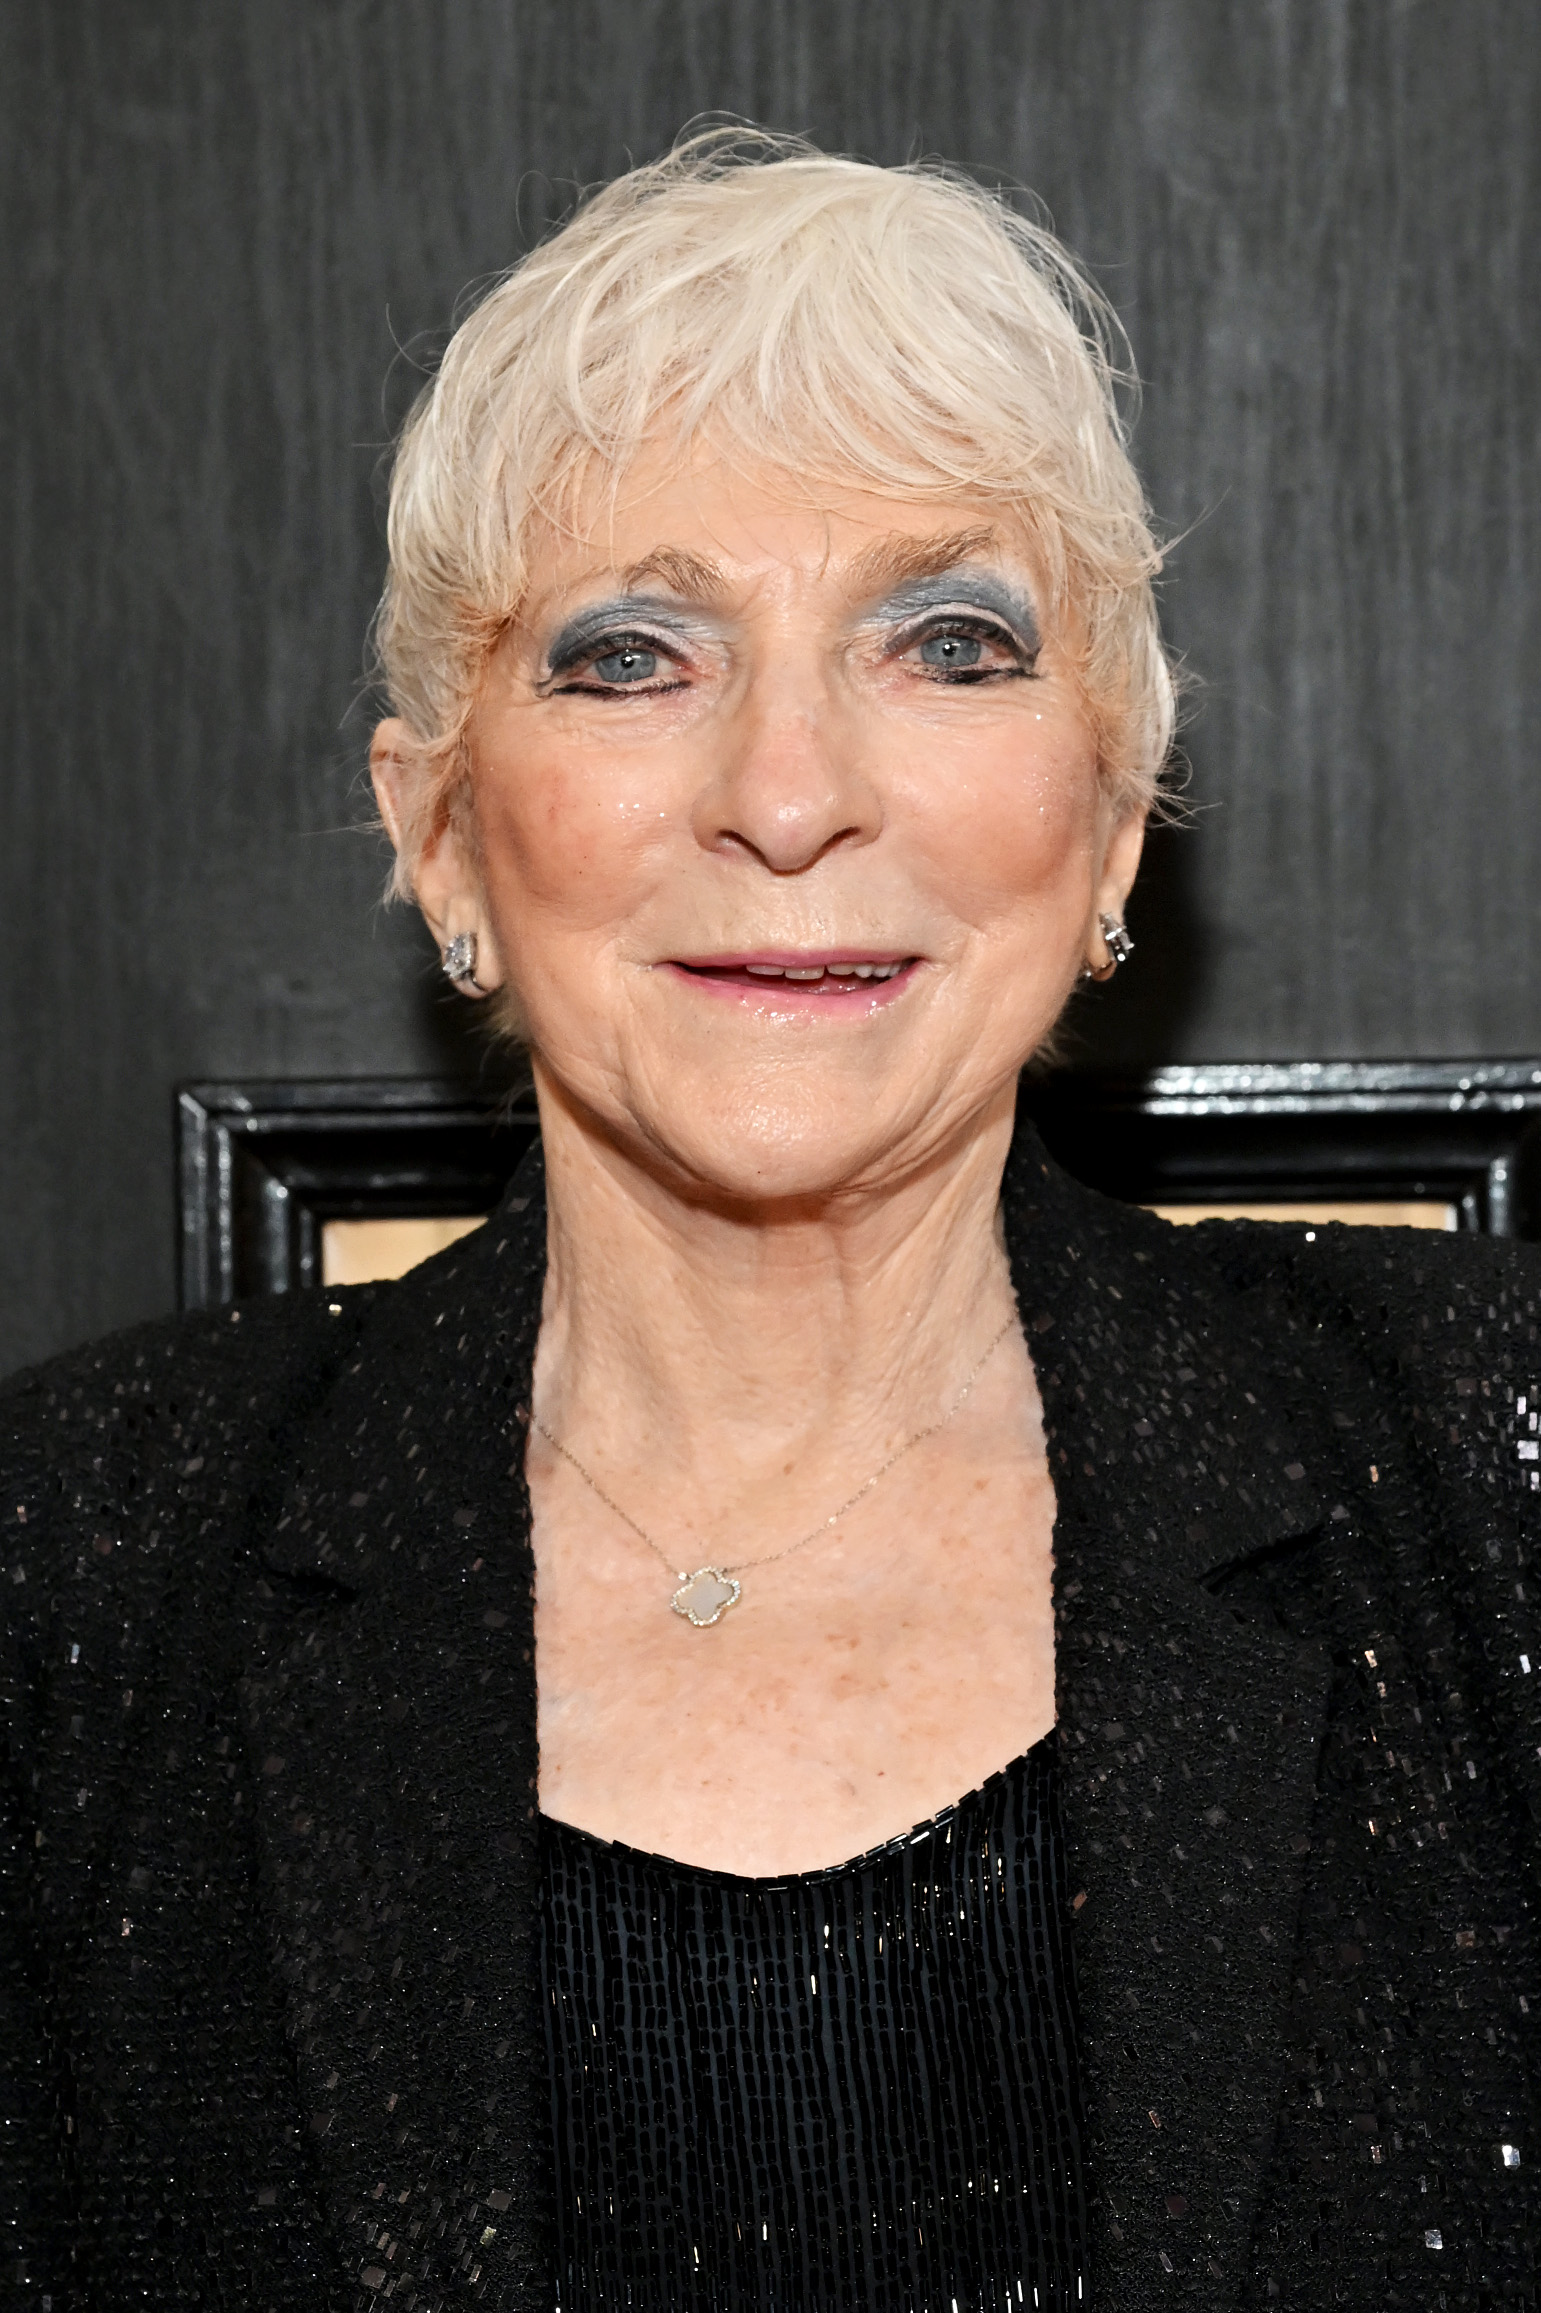 Judy Collins Is with Short Gray Hair at 84 After Son’s